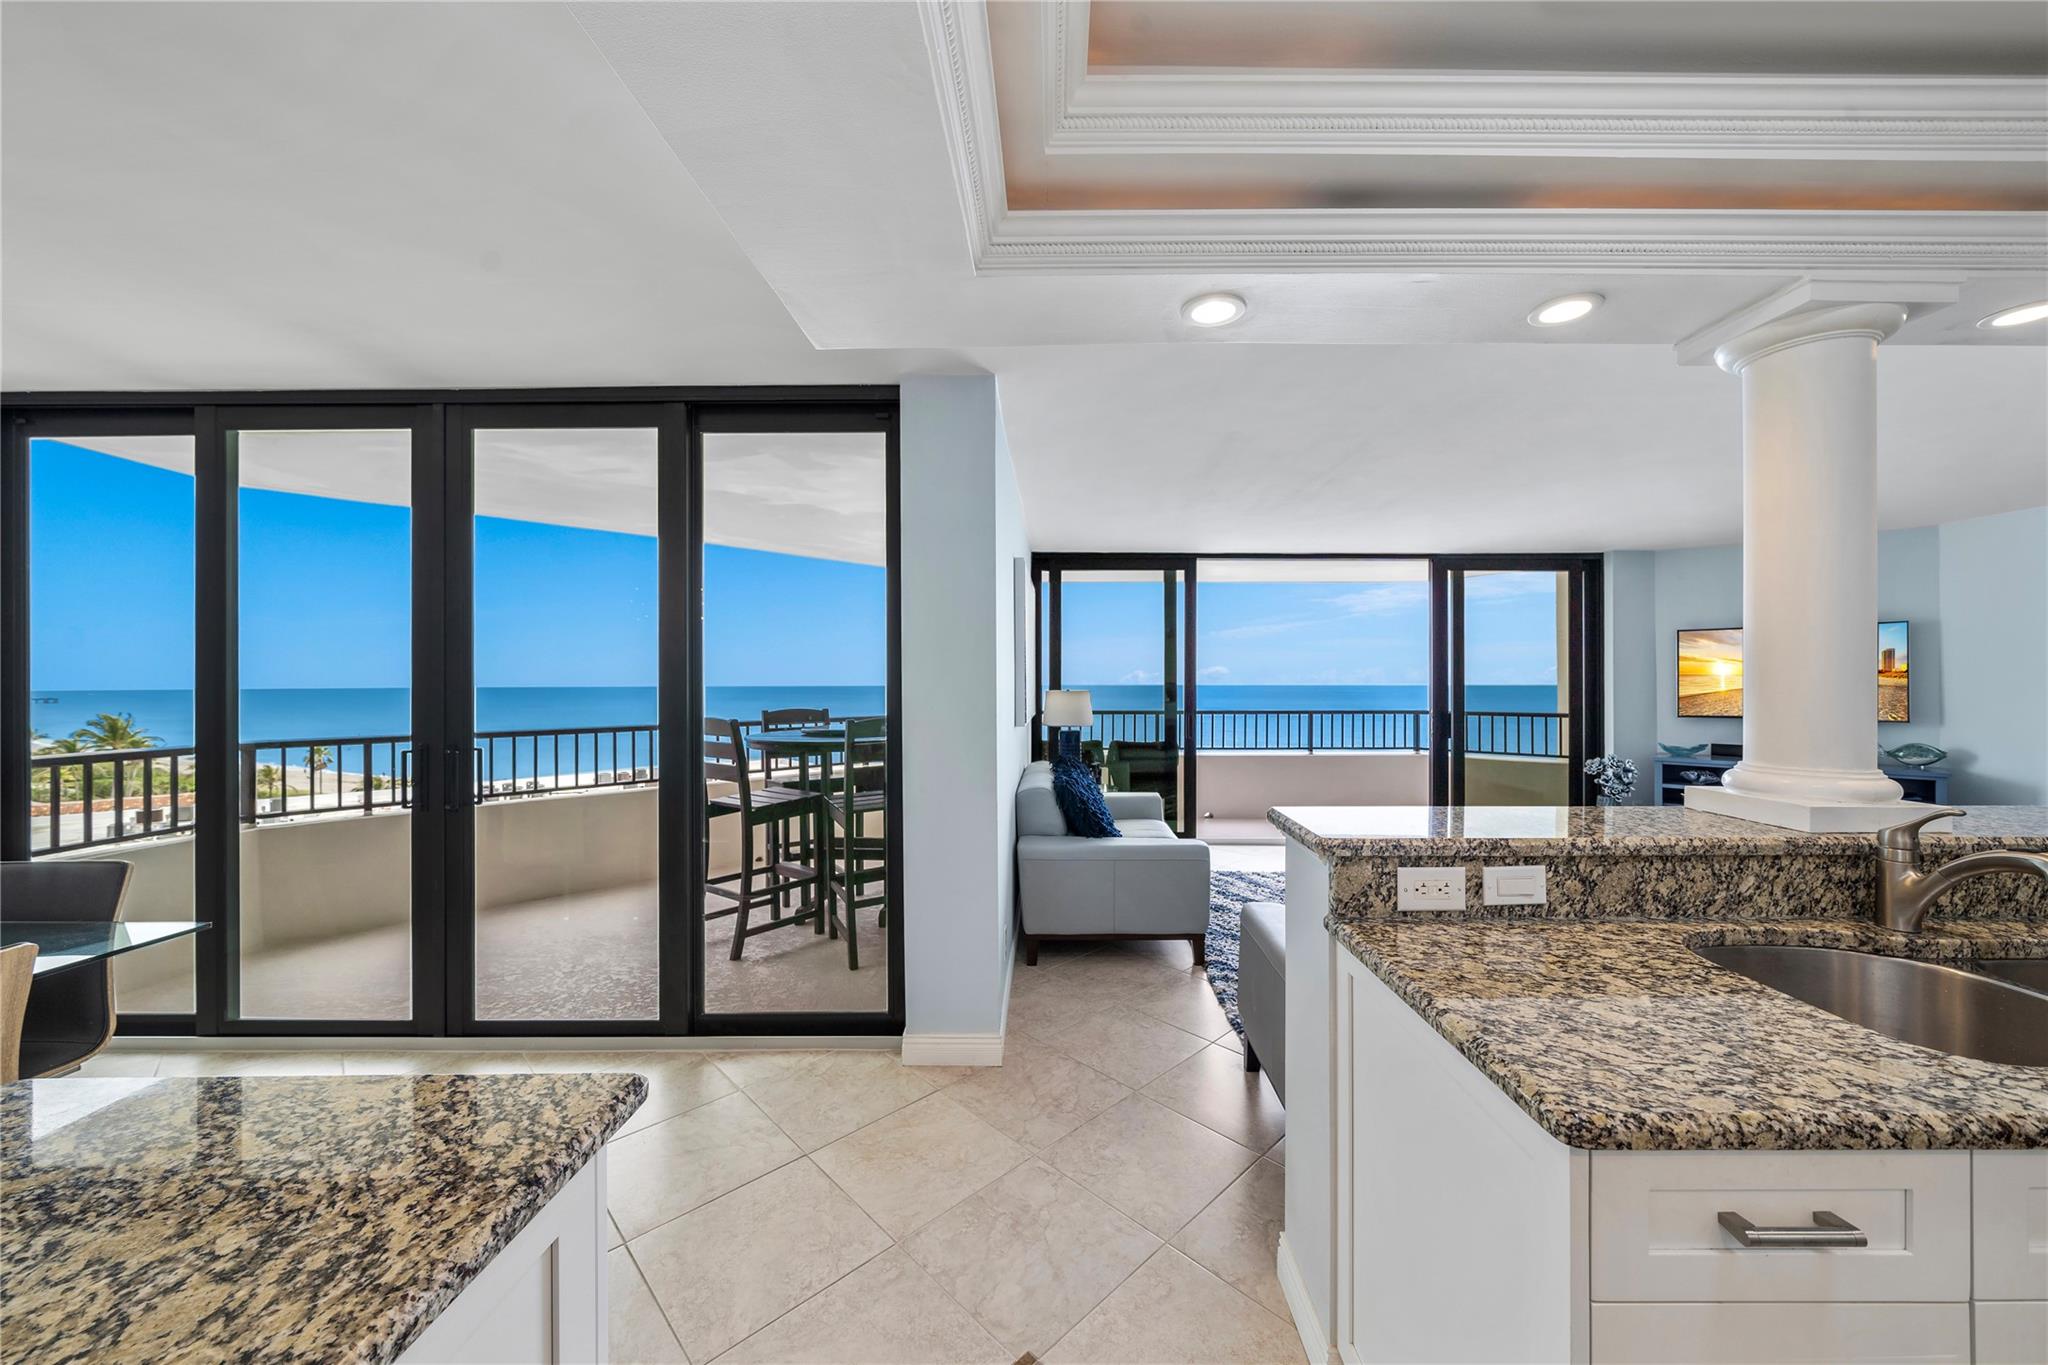 Brand new impact windows and doors are to be installed before closing. One of the only pet-friendly buildings in the area. Welcome to your dream beachfront condo! This stunning property is located in the highly desirable, exclusive Horizon building just steps away from the pristine beaches of Juno Beach. This 2 bedroom 2 bath split floor plan affords privacy for each suite, separated by an open modern kitchen and great room area with breathtaking ocean views. This highly sought after 12 story boutique building with only 46 units allows a quiet private feel for you and your guests. Amenities include a heated pool, jacuzzi, fitness center, and club room.